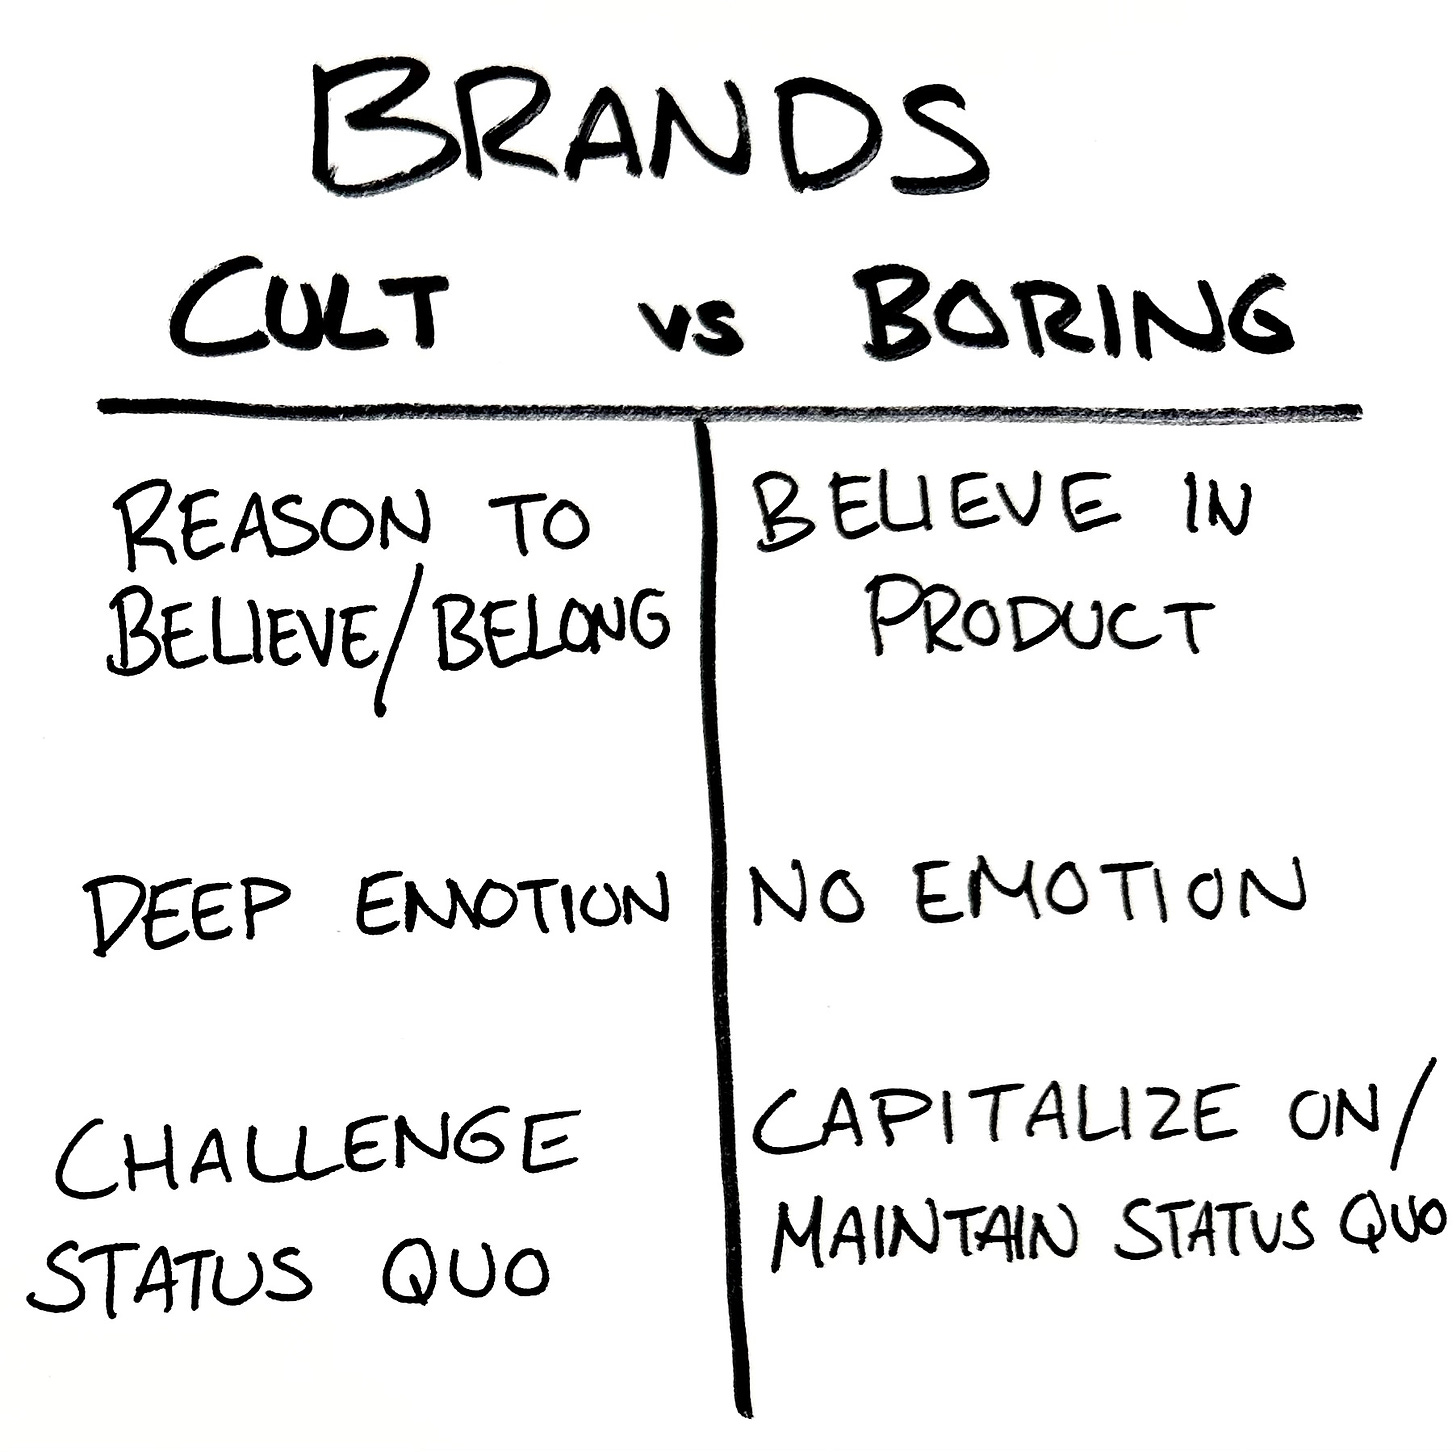 a hand drawn diagram labeled "brands" with two columns, one for cult and one for boring. The first row says cult brands offer a reason to believe / belong while boring brands just believe in the product. The second row says cult brands have deep emotion while boring brands have no emotion. The third (and final) row says cult brands challenge the status quo while boring brands capitalize on / maintain the status quo.